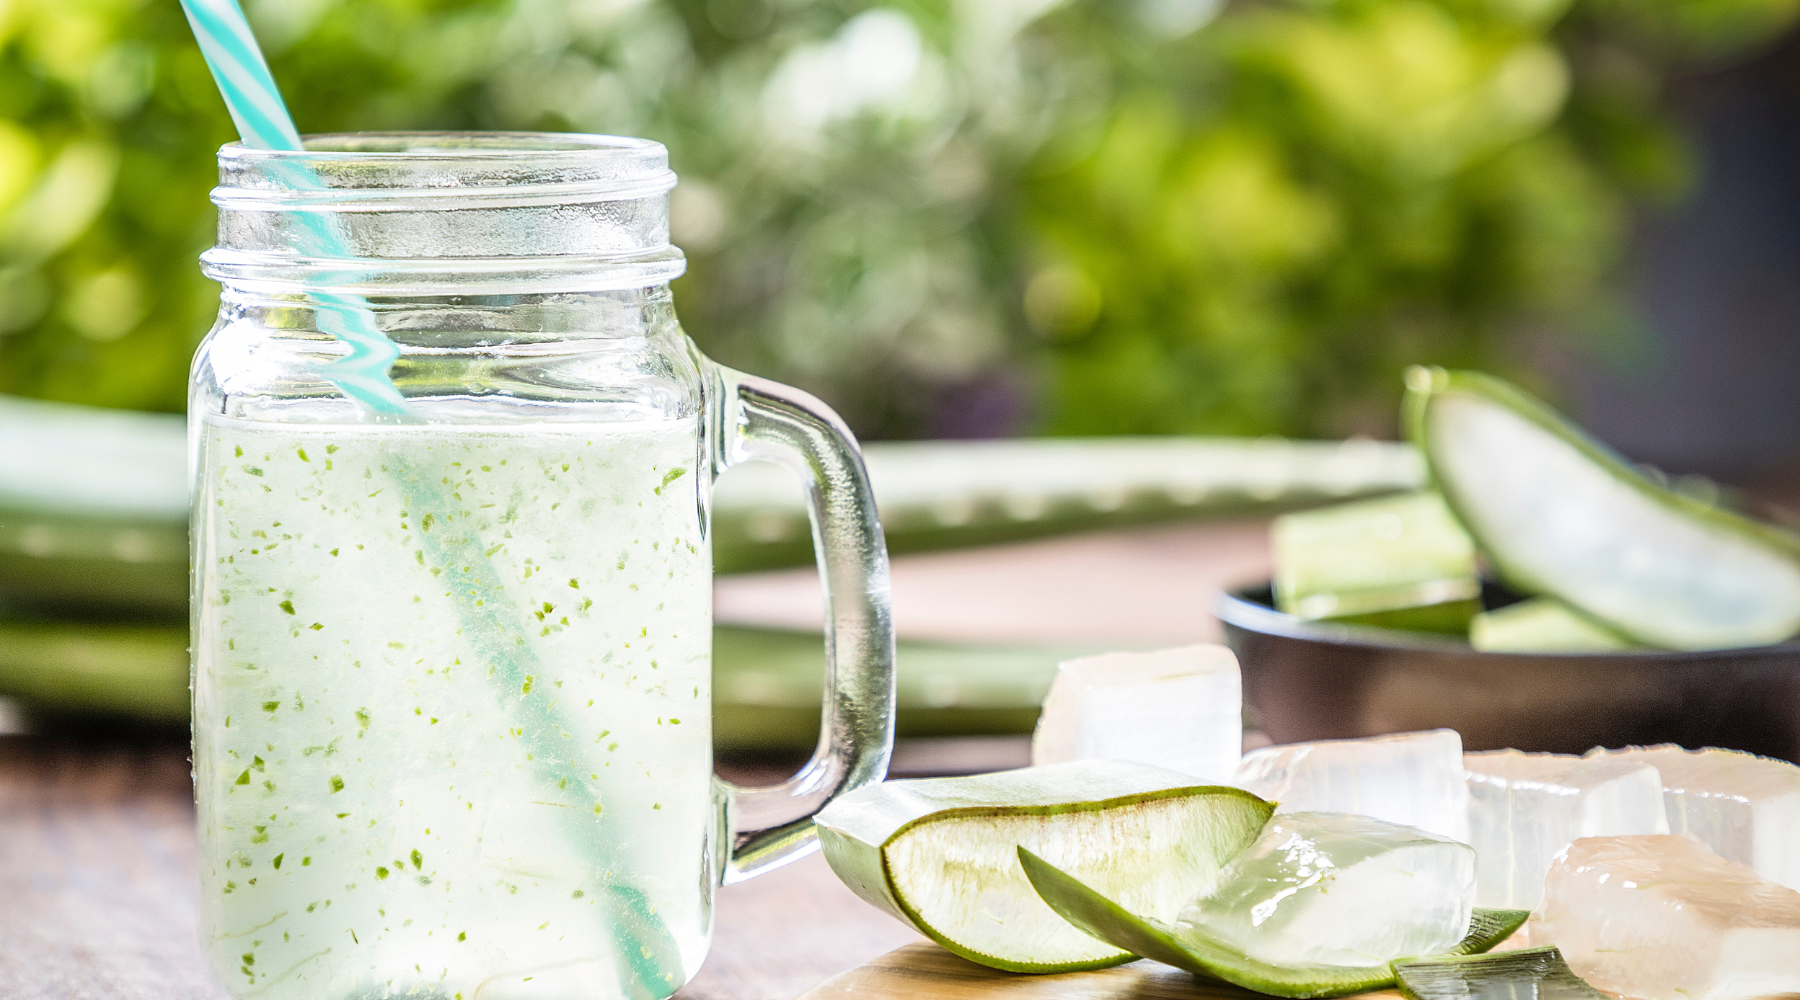 HOW TO DETOX WITH ALOE VERA FOR OVERALL IMPROVED HEALTH